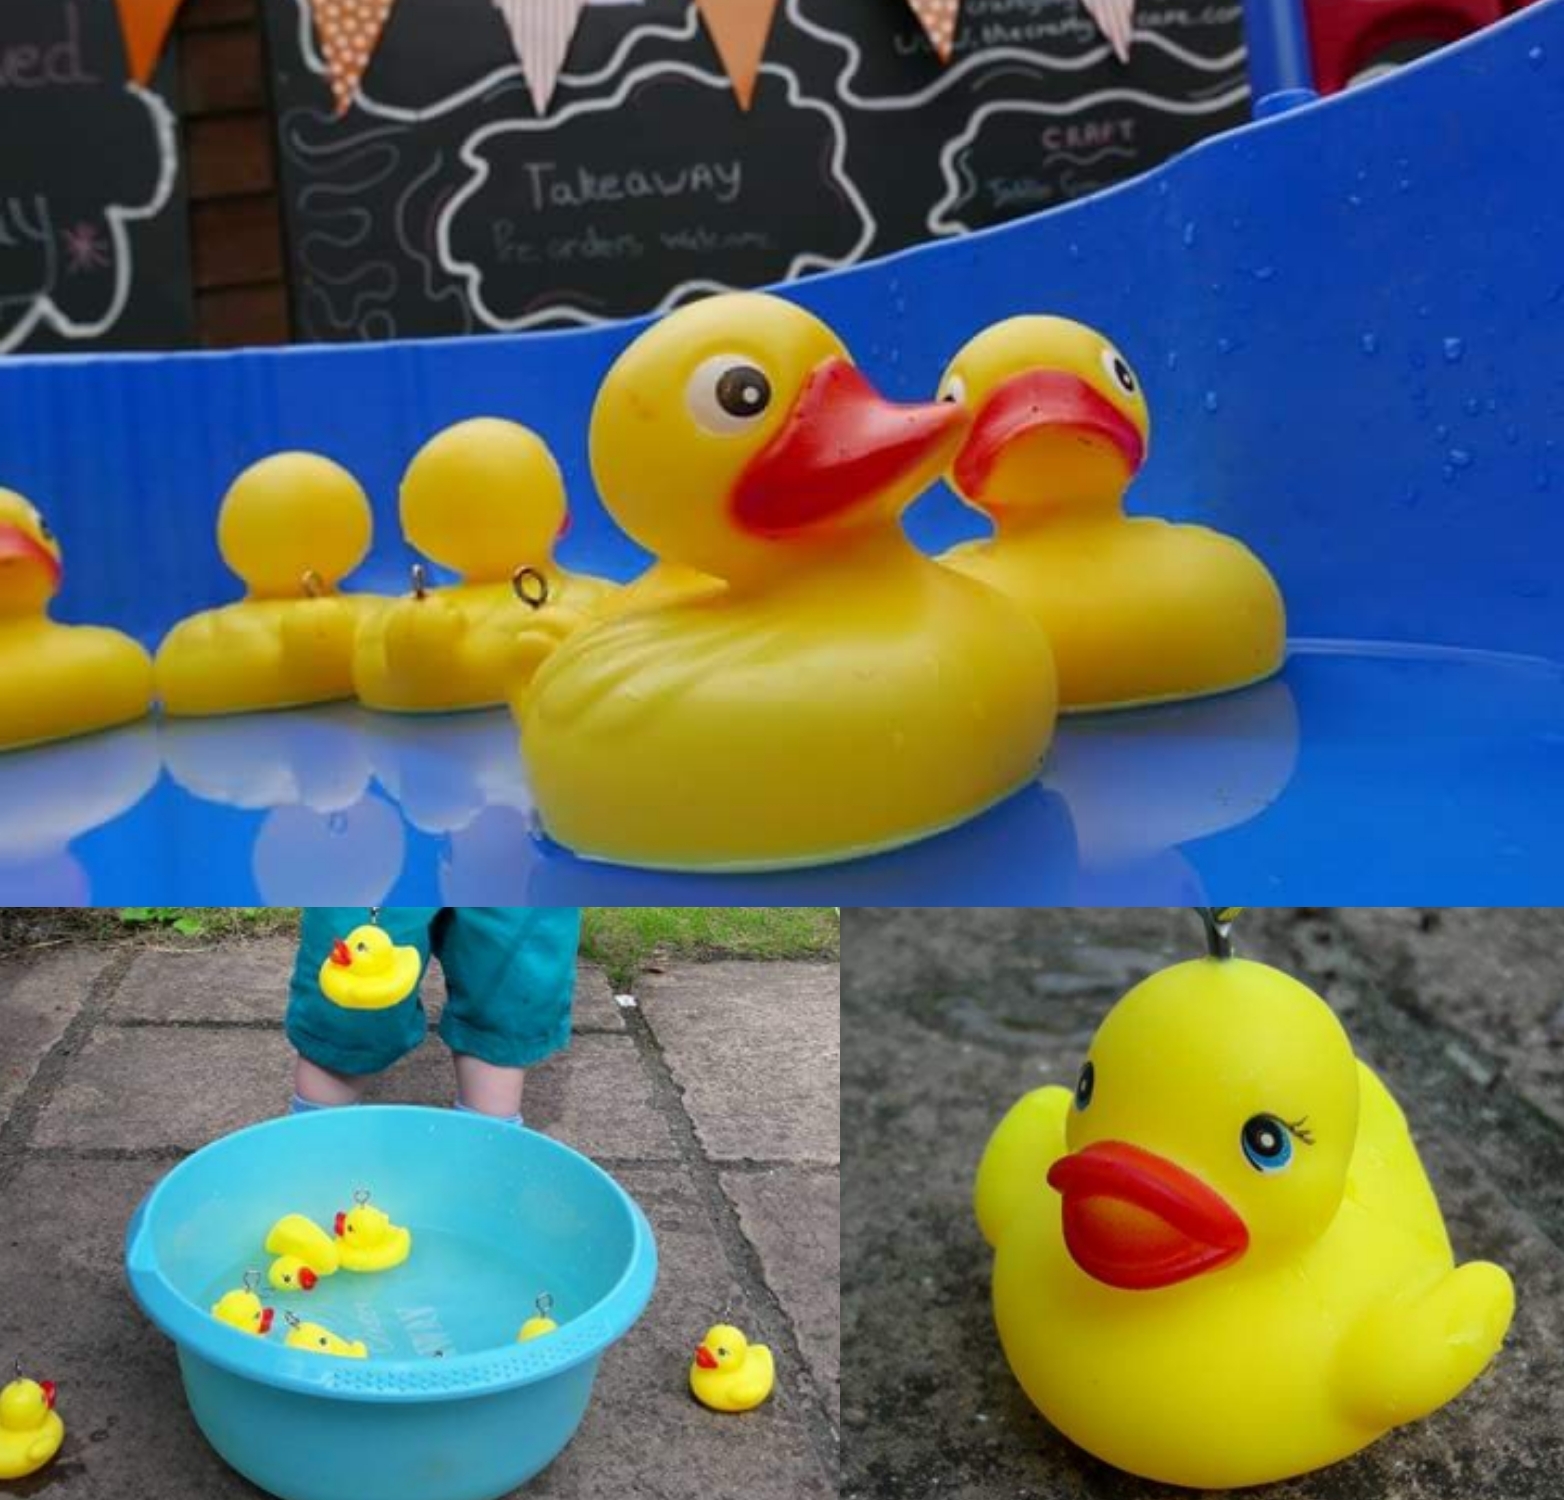 Make your own 'Hook a duck' game – Childsplayabc ~ Nature is our playground